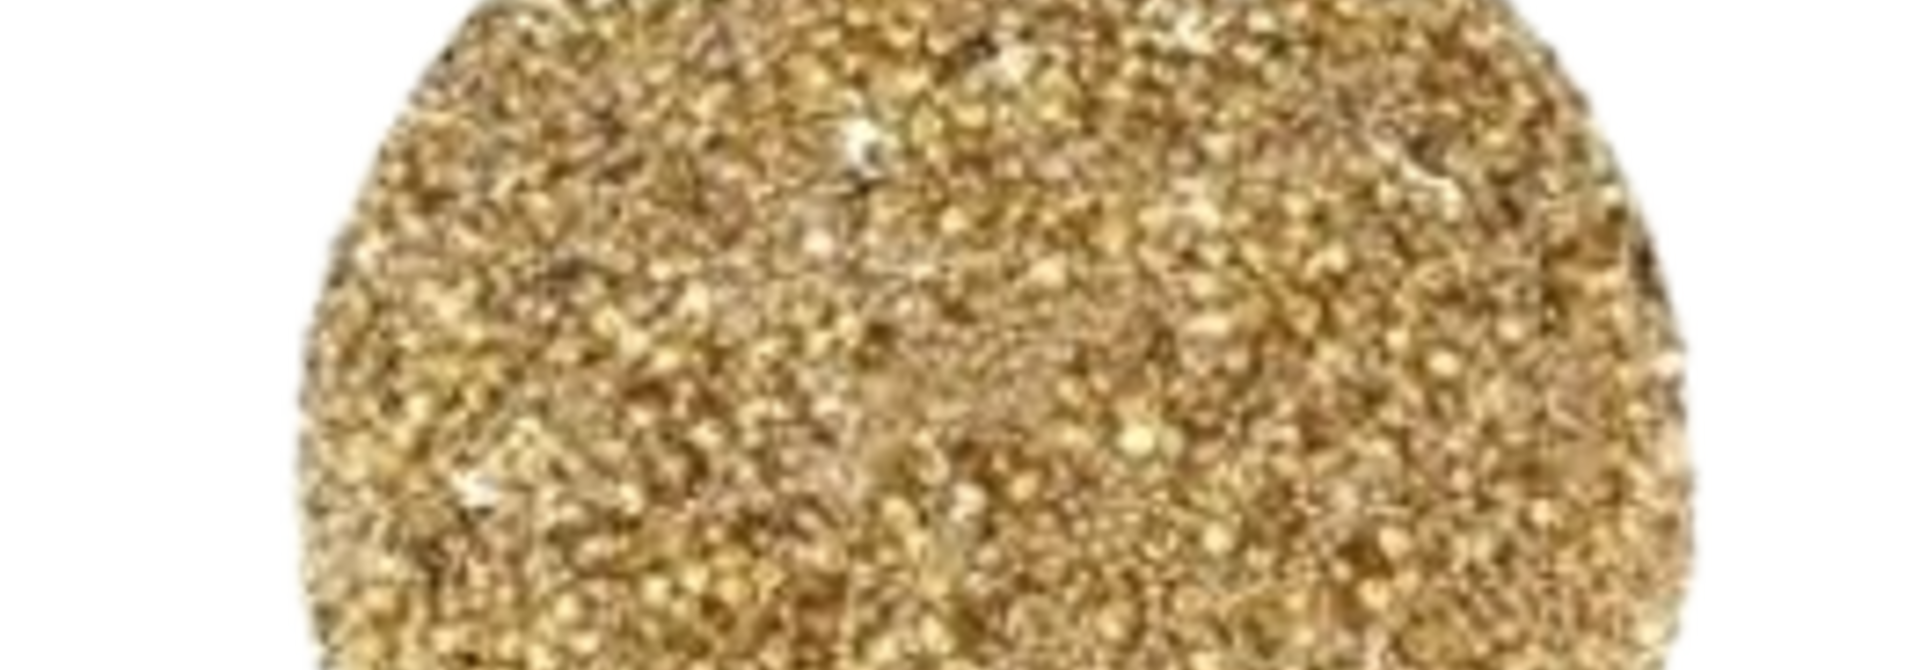 Beaded Ball | The Holiday Ornament Collection, Gold- 4 Inch x 4 Inch x 4 Inch